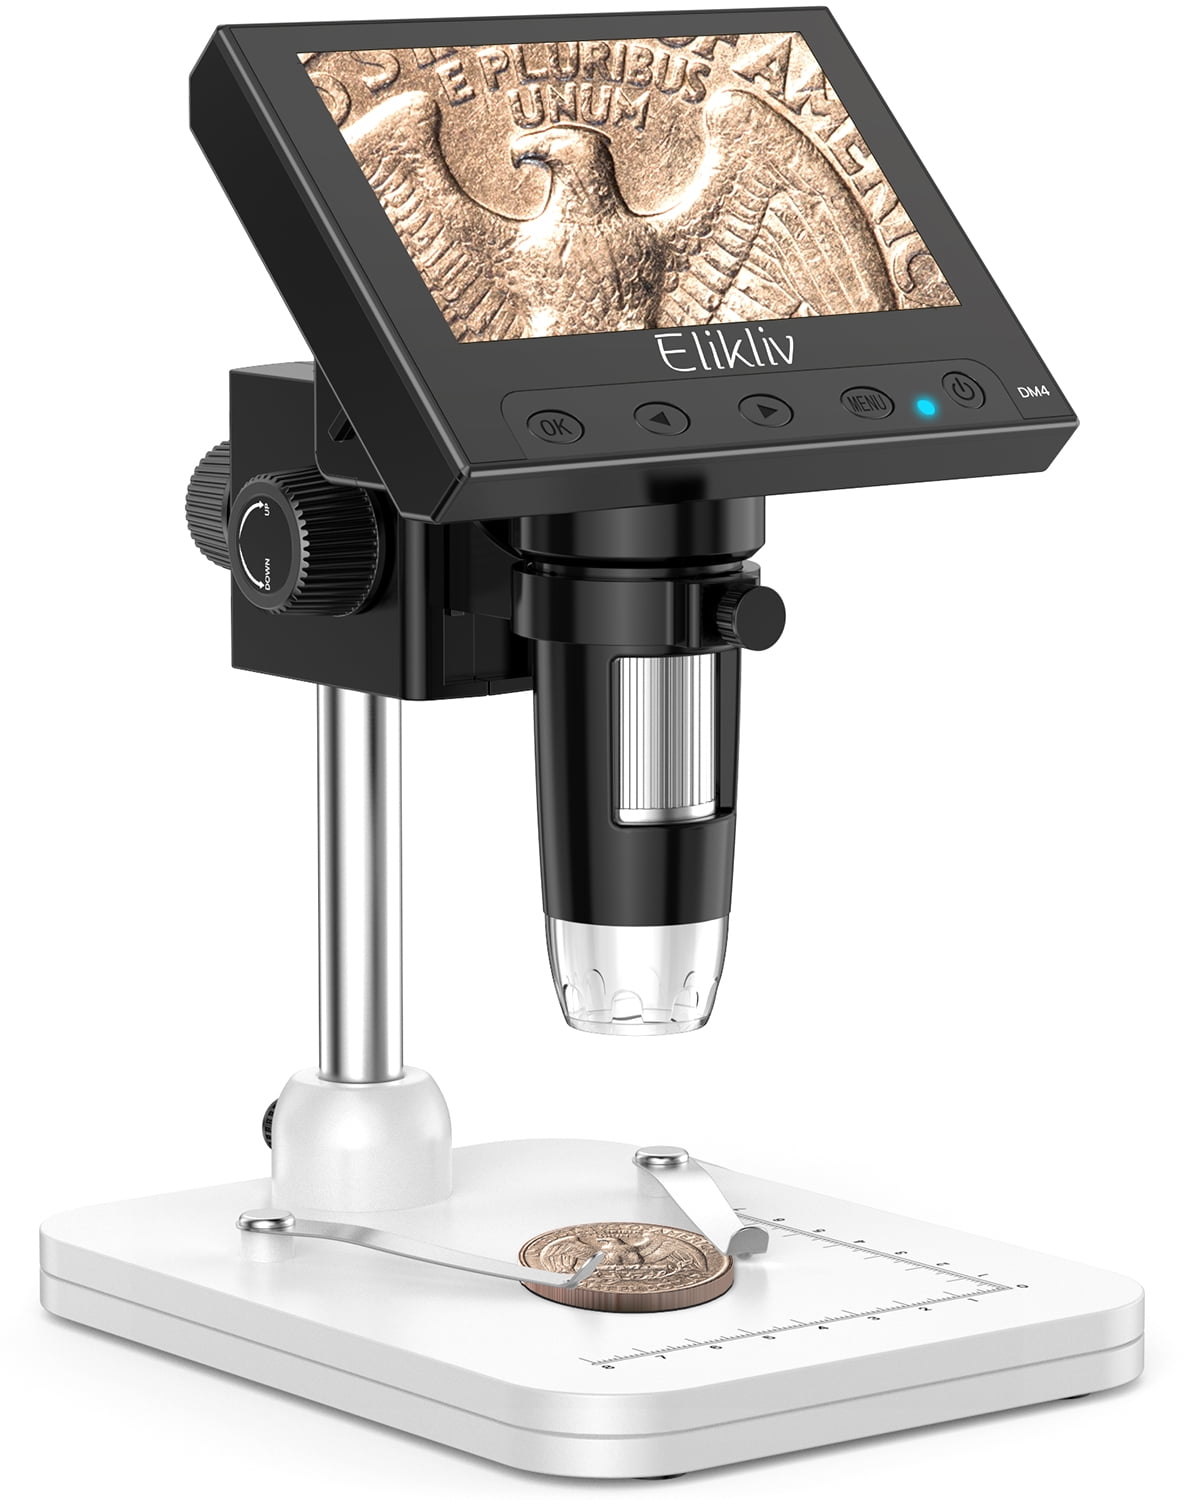 Elikliv Coin Microscope, 4.3 LCD Digital Microscope 1000x, USB Coin  Microscope for Error Coins with Lights for Kids Adults, PC View, Windows